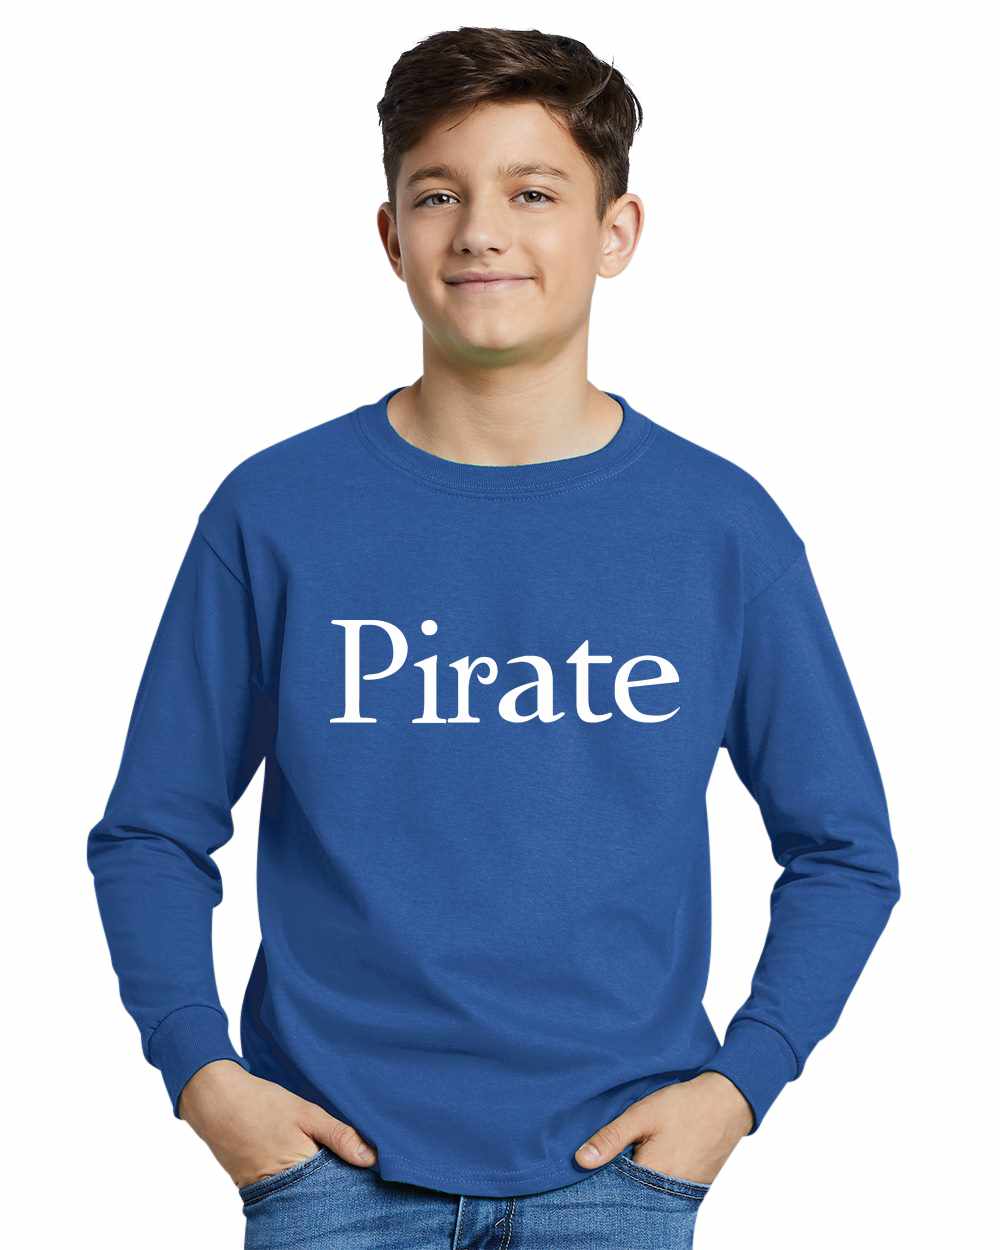 Pirate on Youth Long Sleeve Shirt (#620-203)